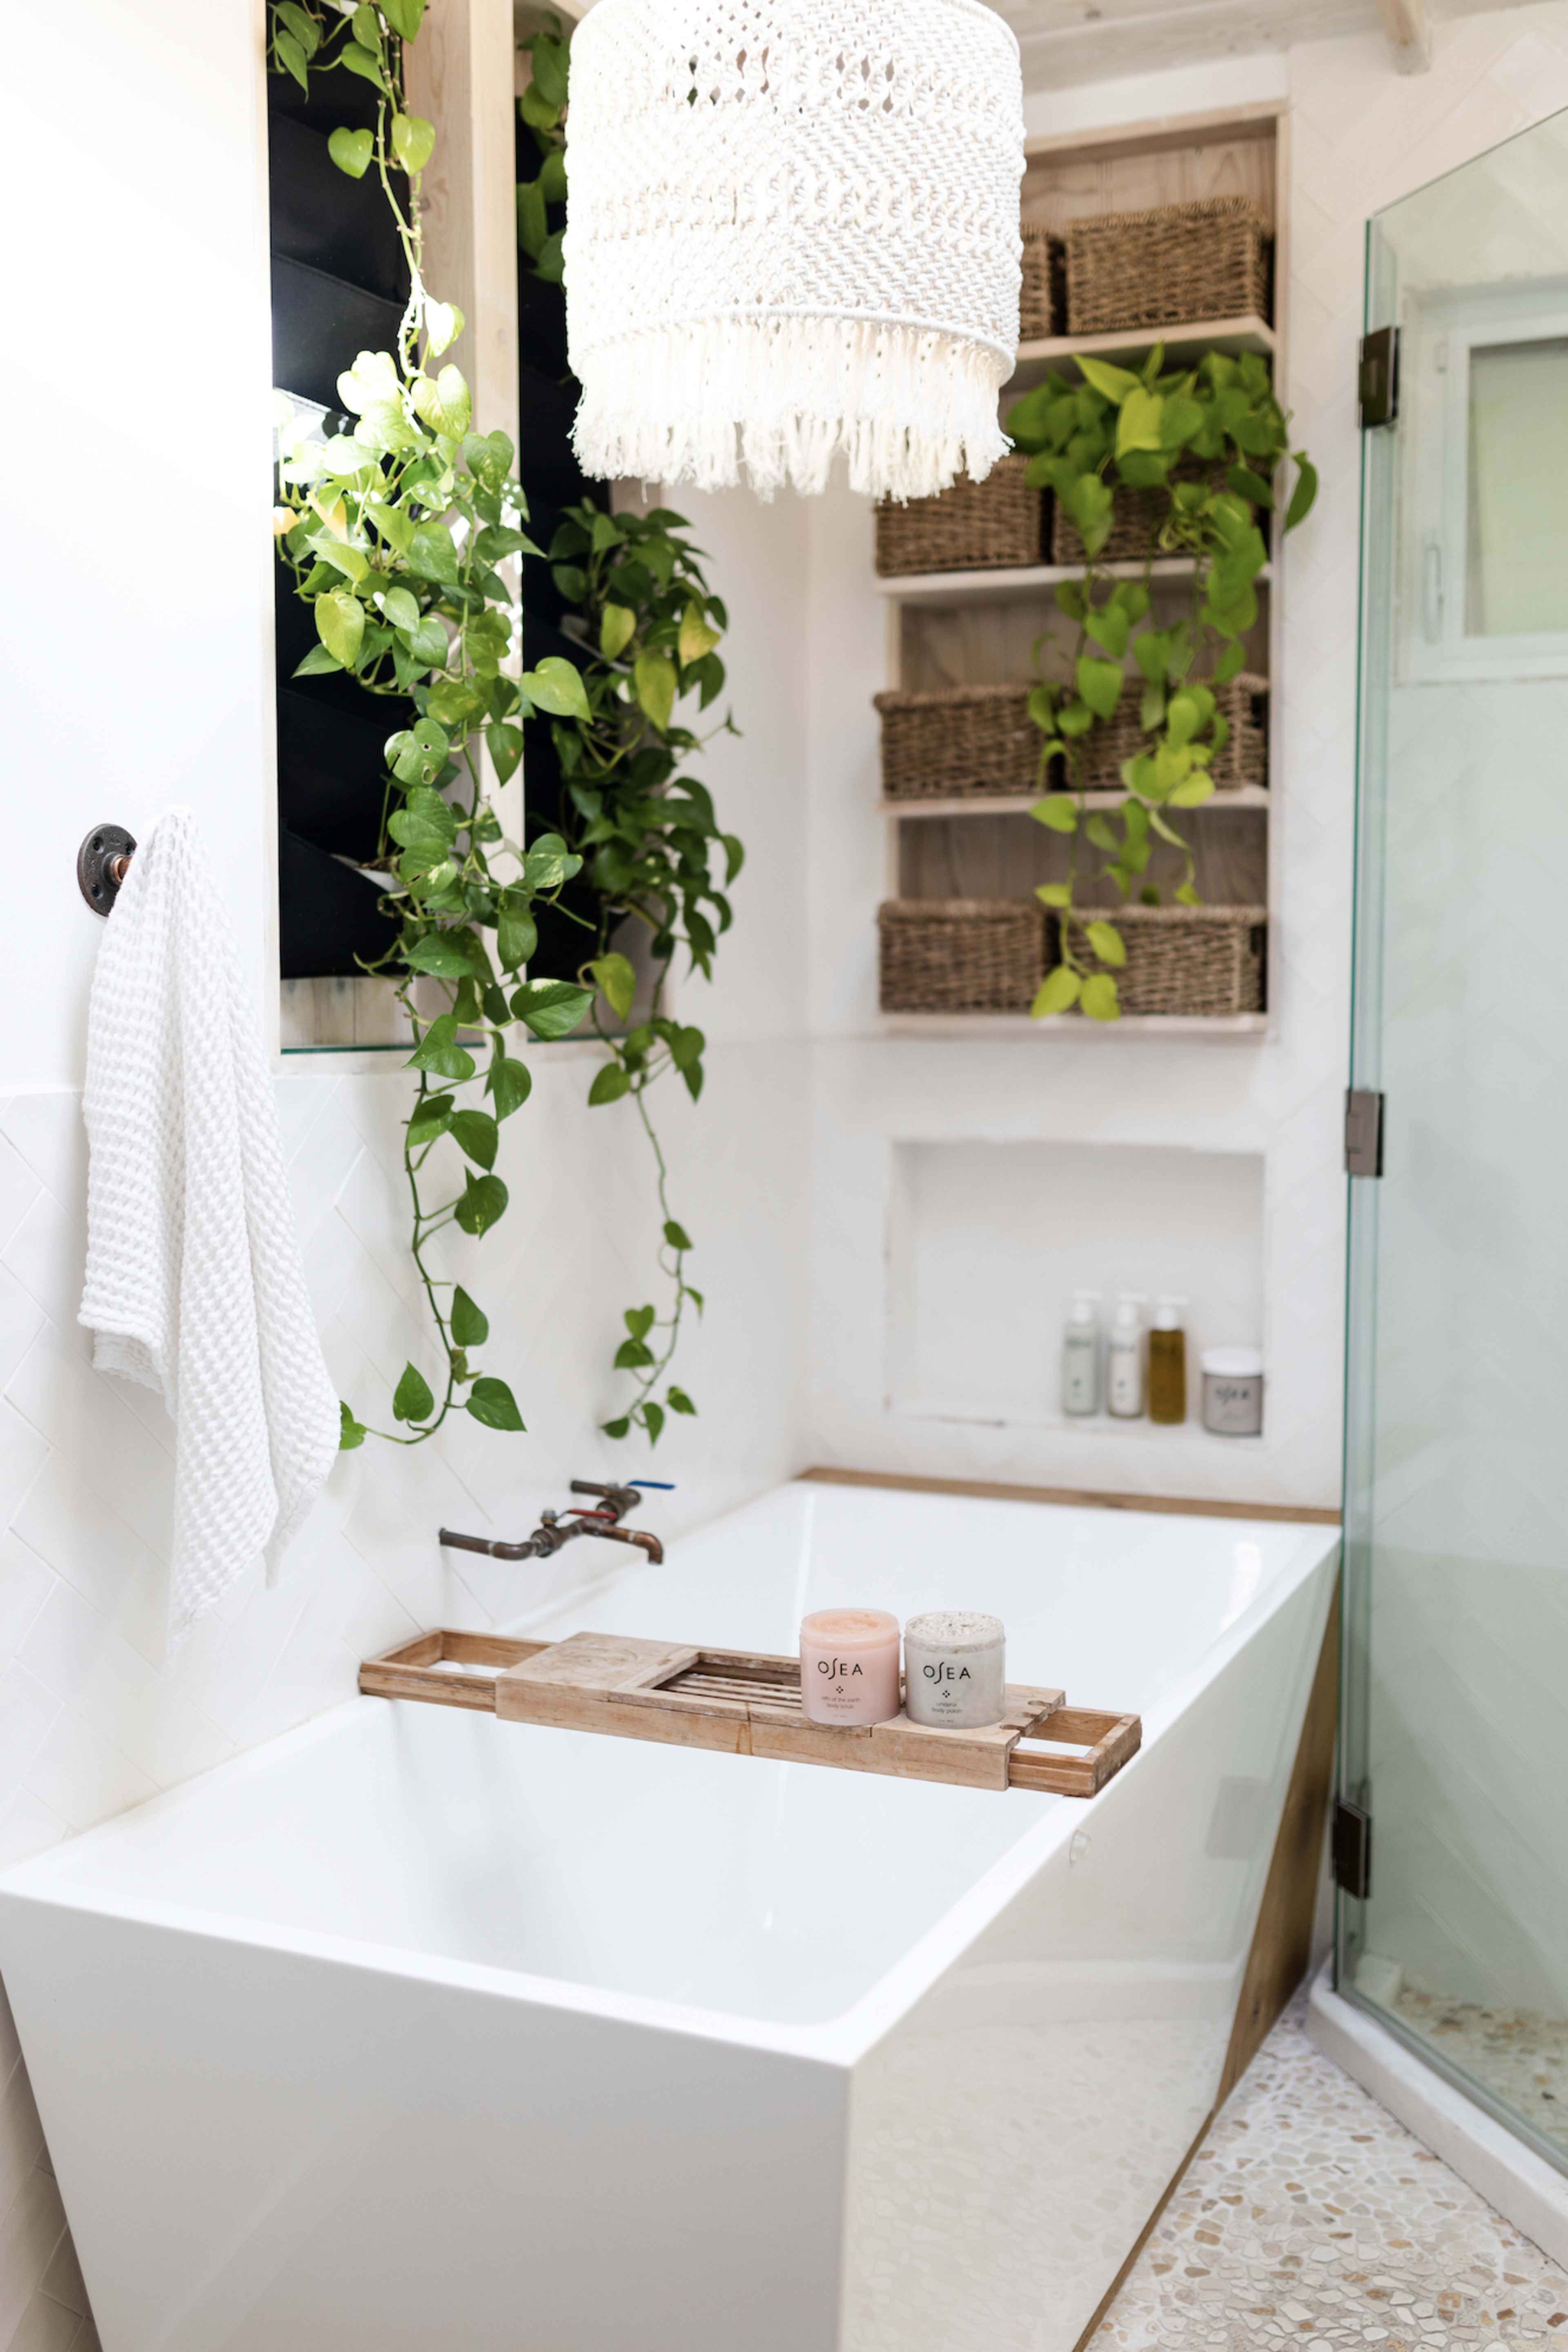 A photo shoot of a white bath and shower surrounded by plants.